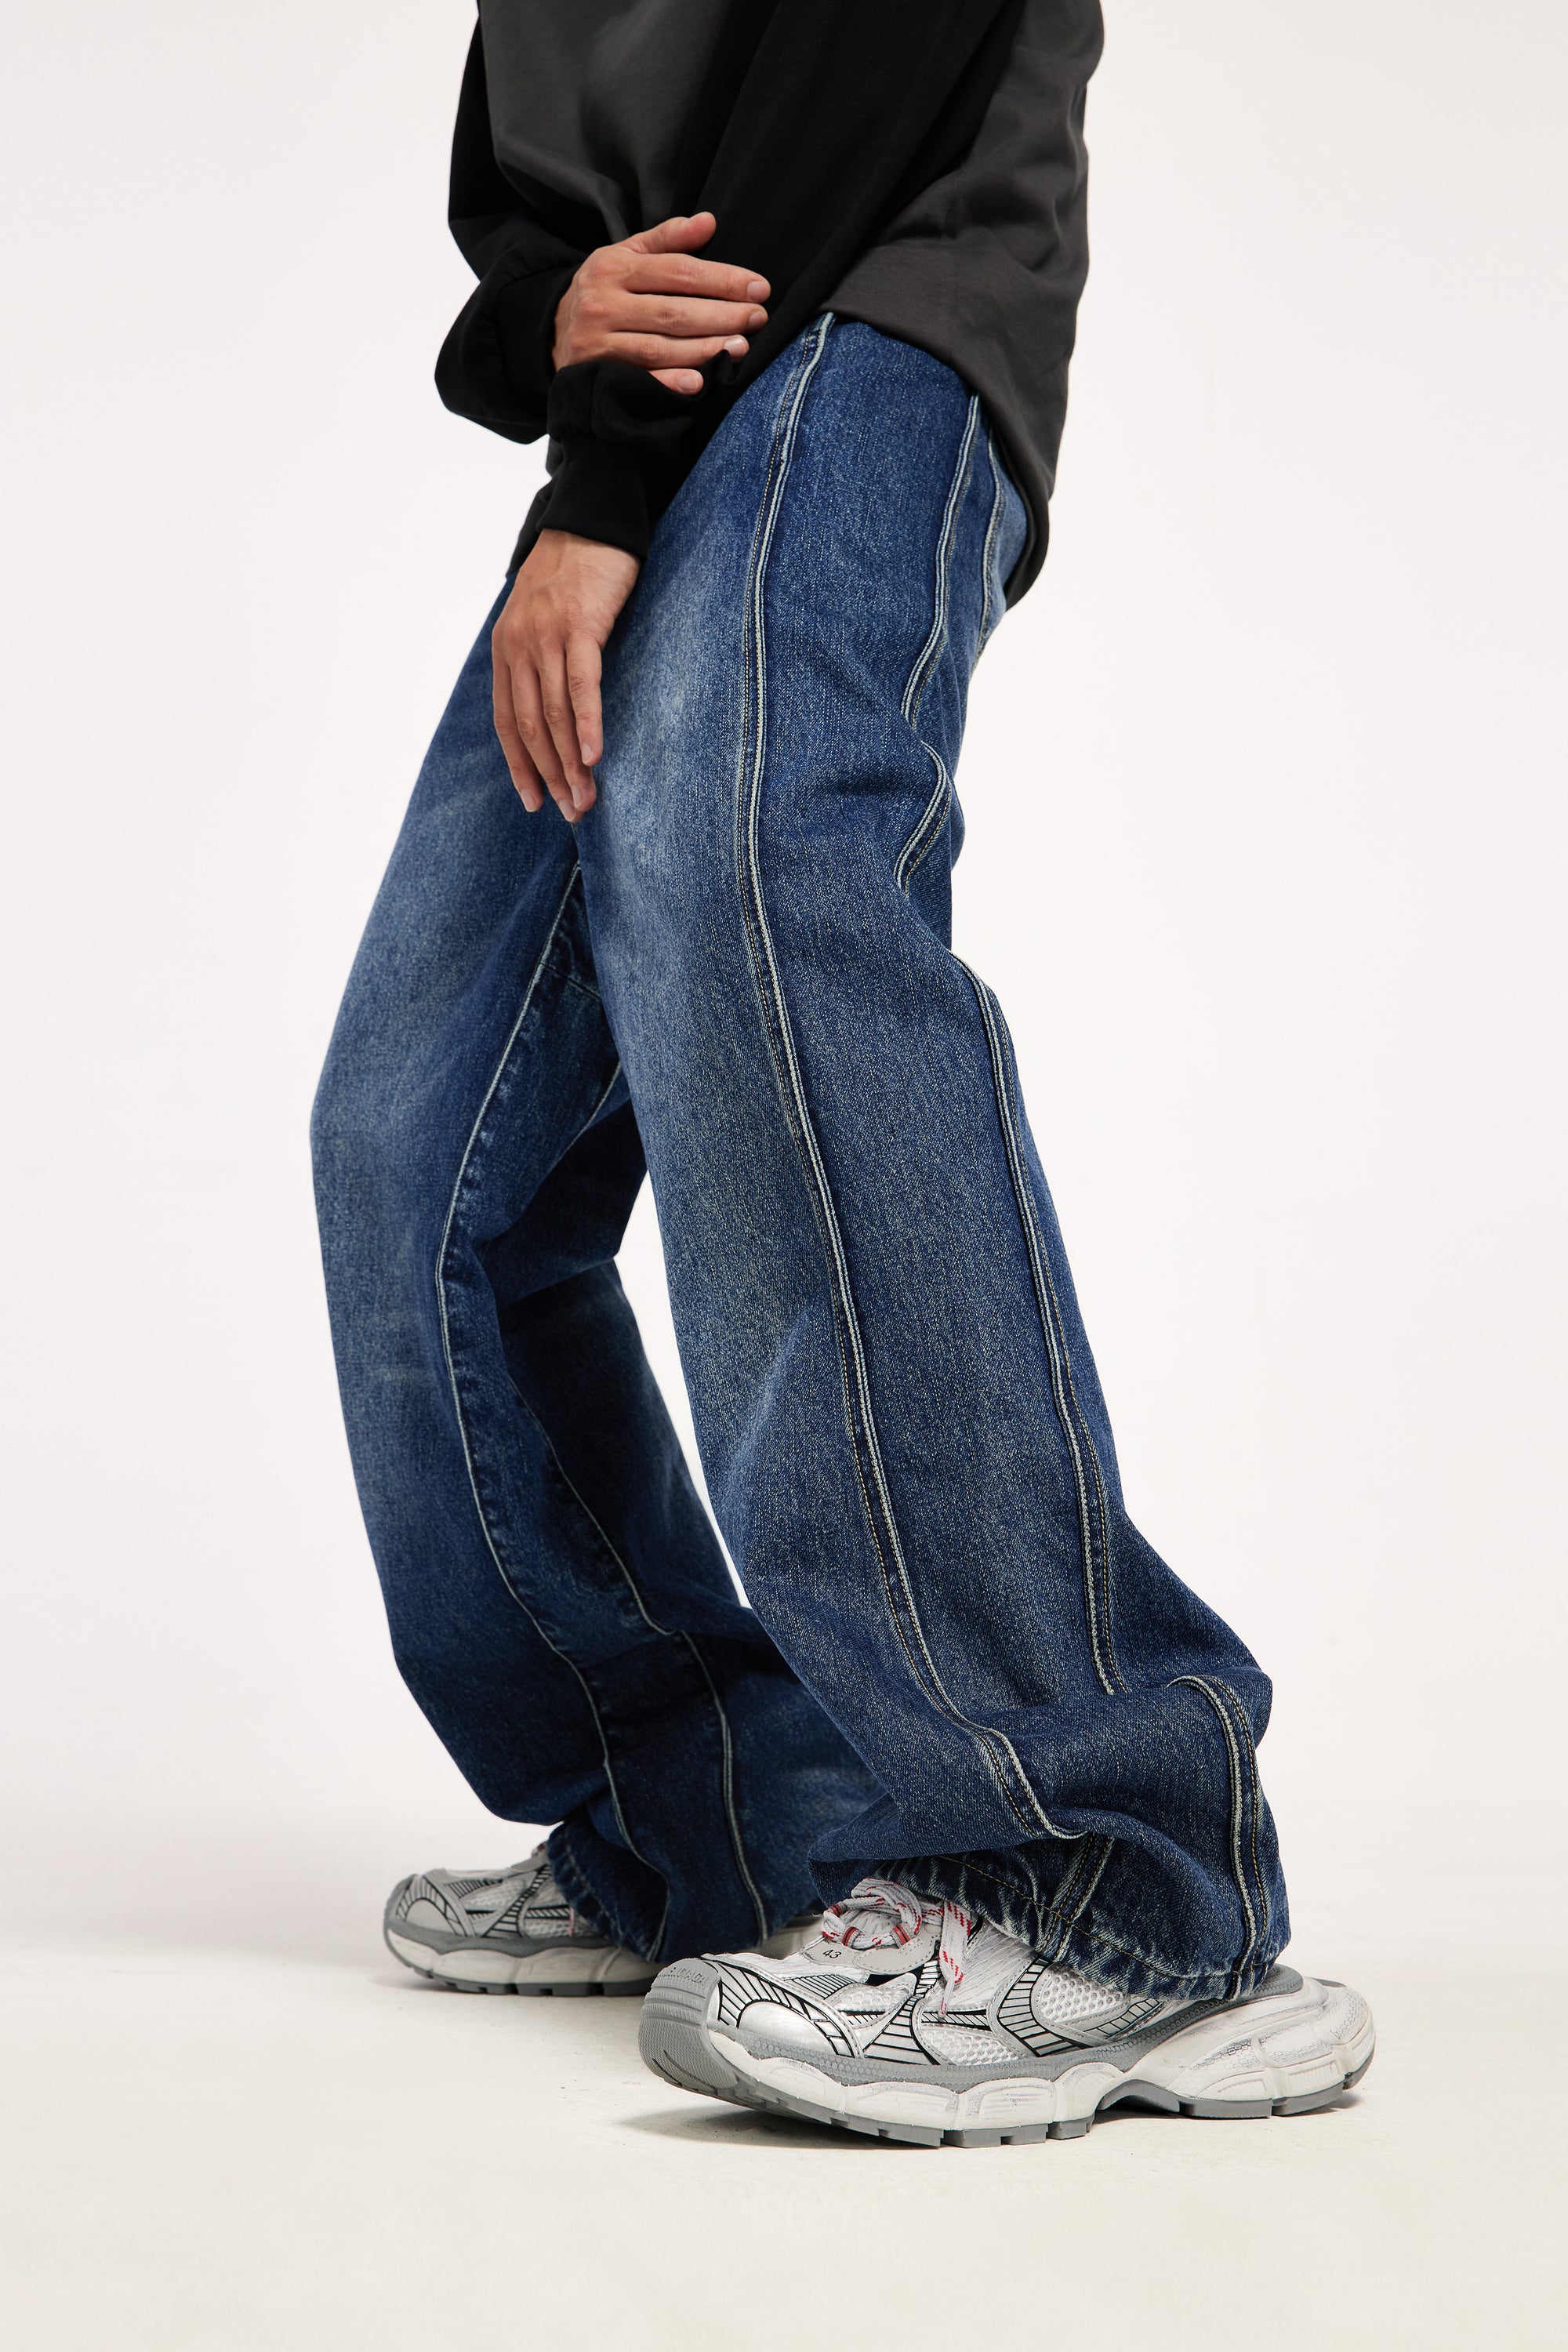 jean baggy homme